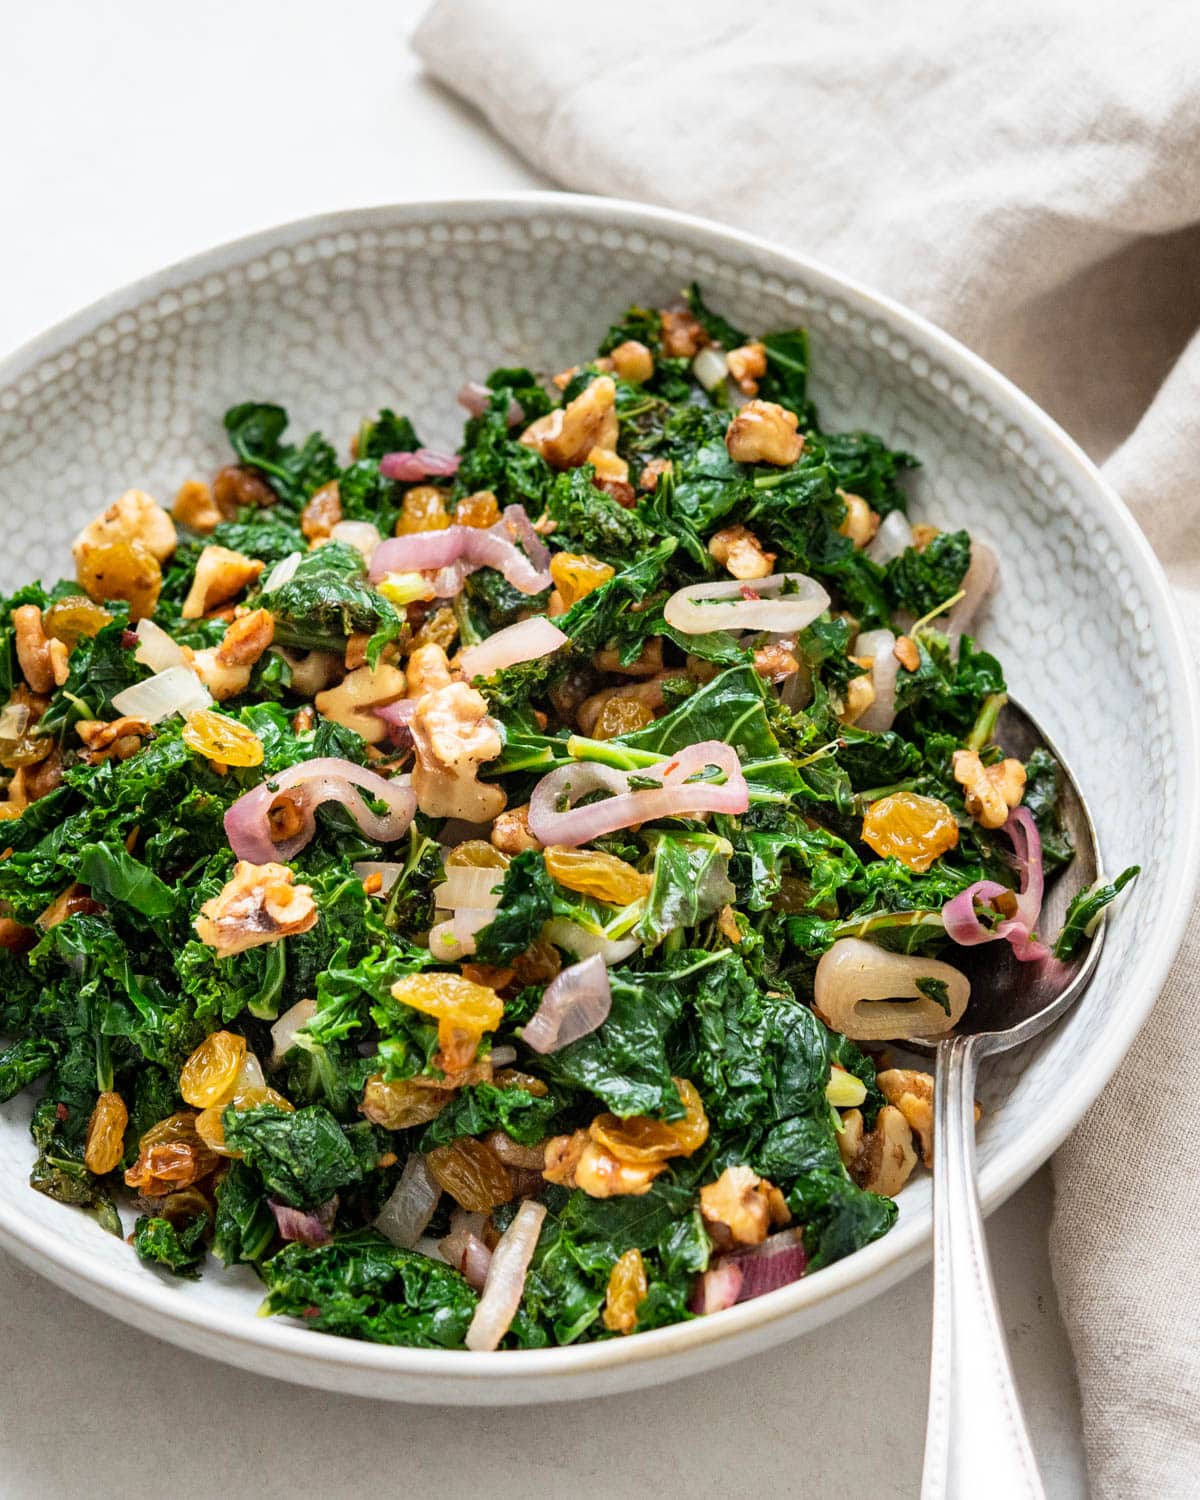 A bowl of blanched kale with toasted walnuts and golden raisins.